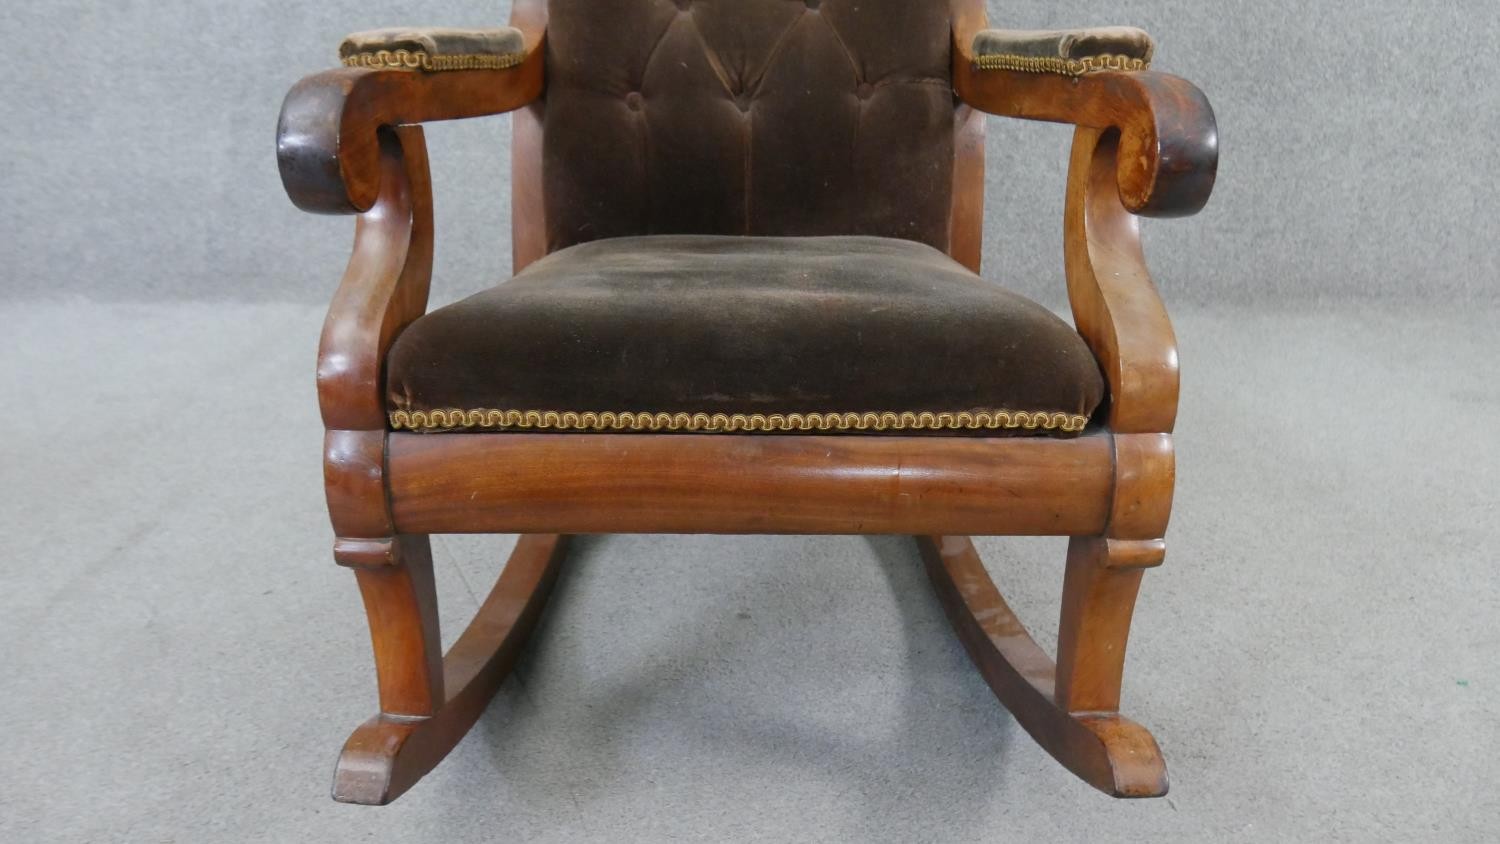 A 19th century mahogany framed rocking chair in buttoned velour upholstery. - Image 5 of 6